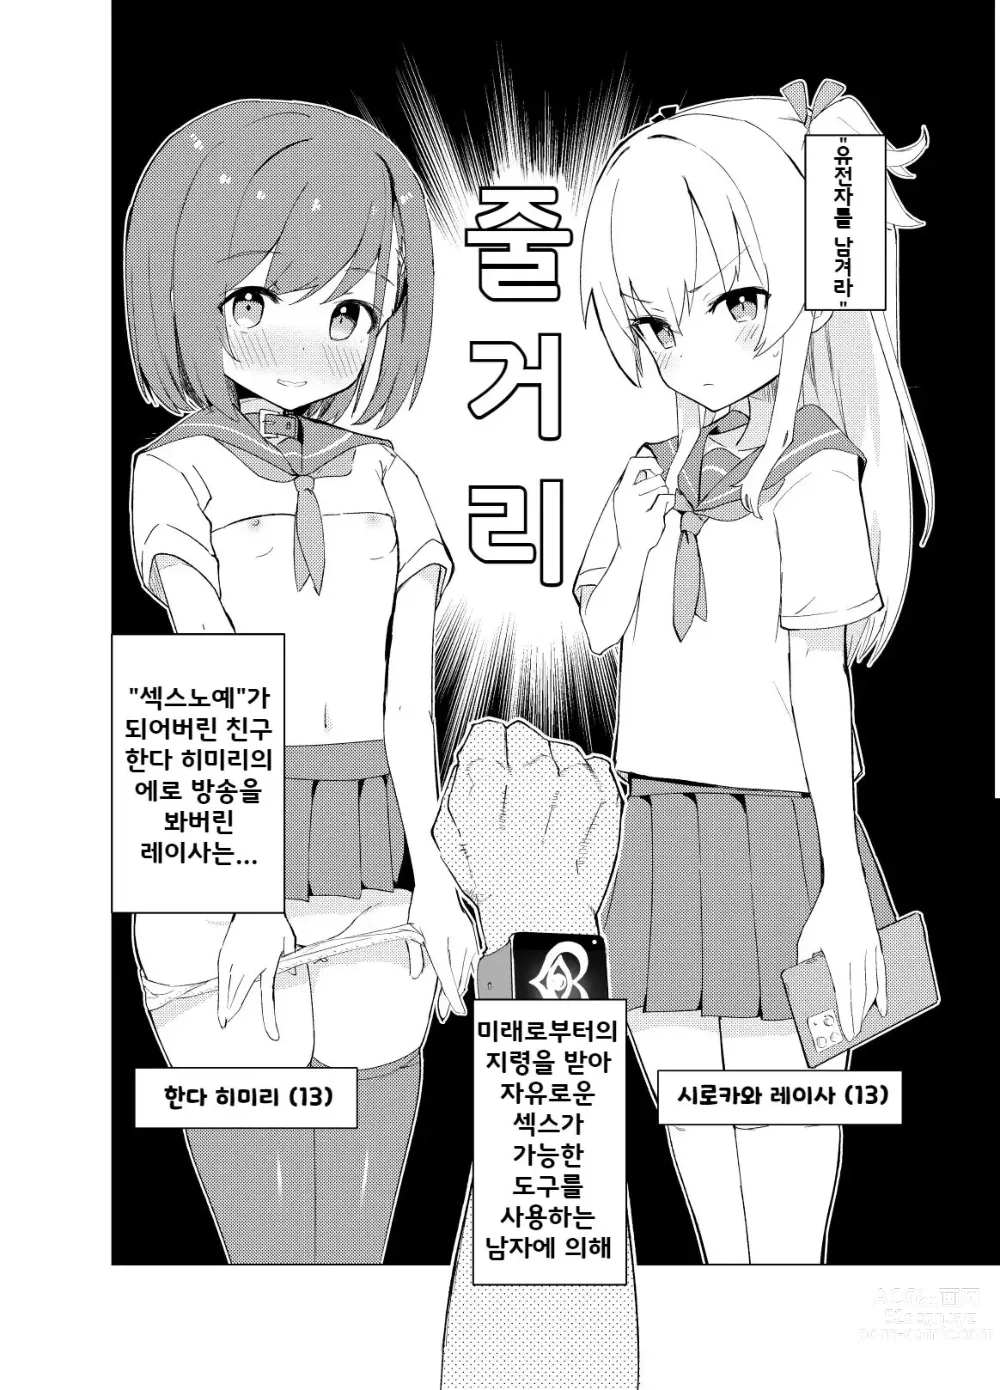 Page 2 of doujinshi S.S.S.Di part 1